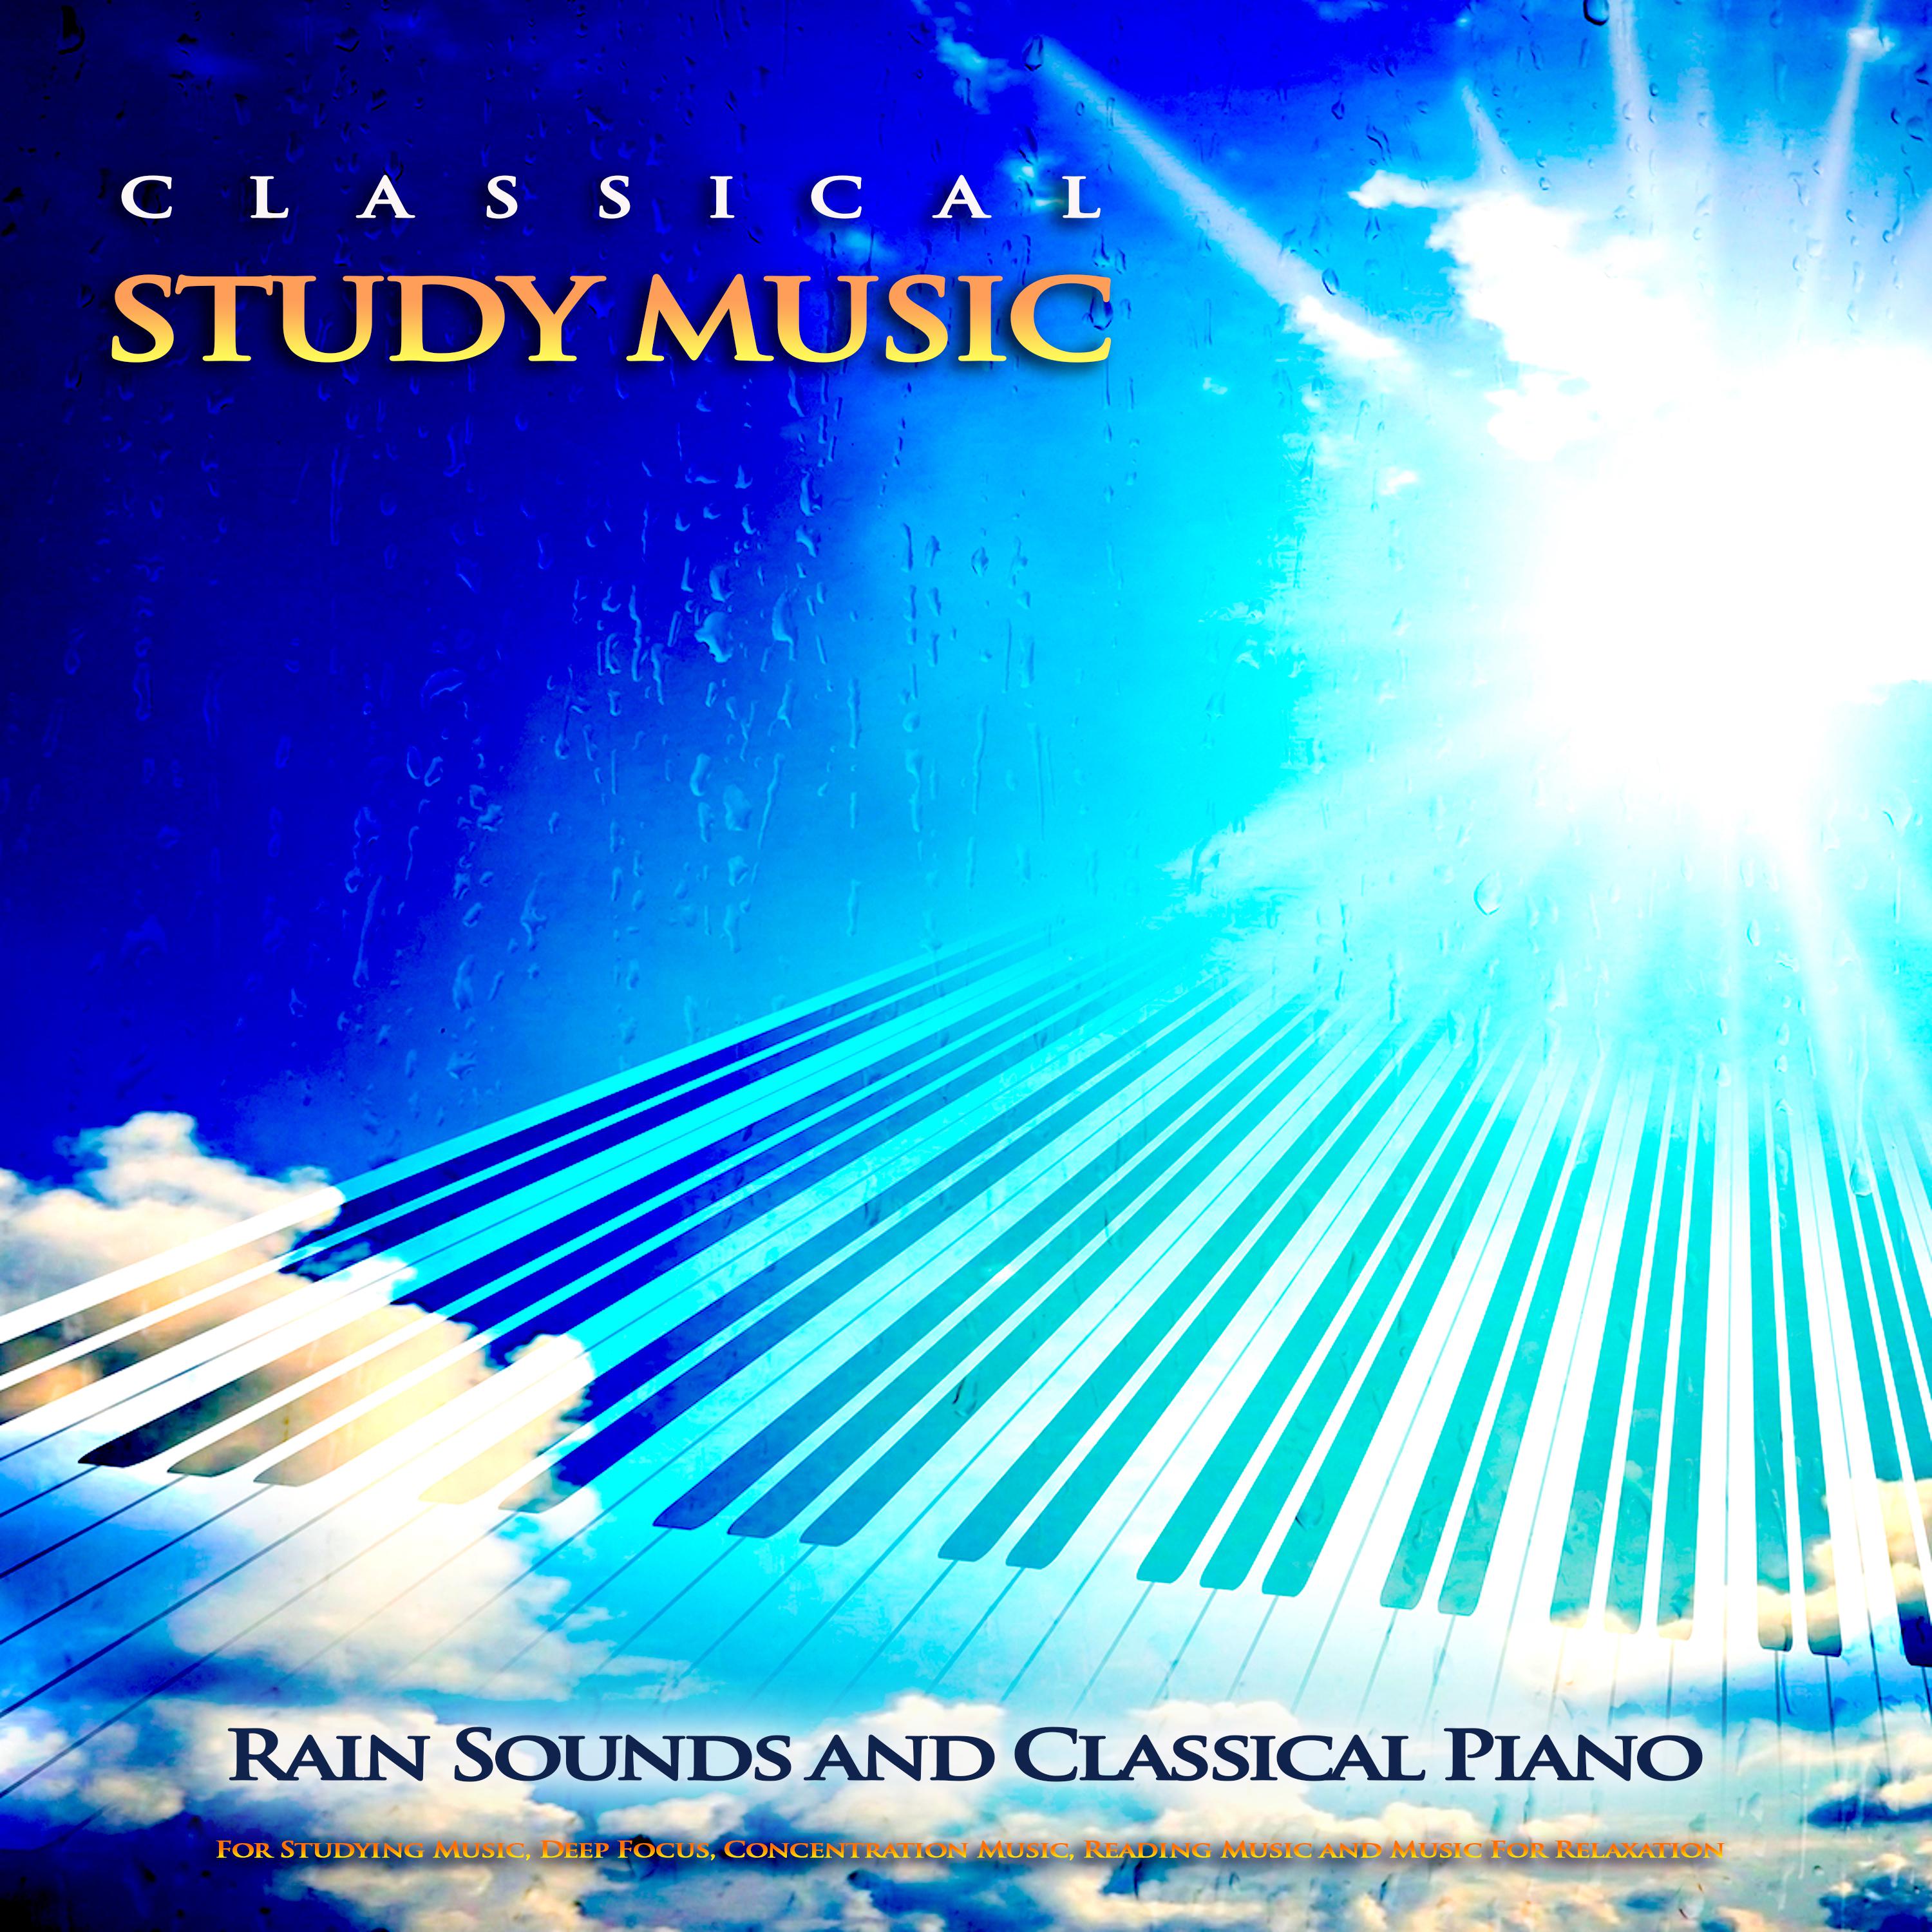 Claire De Lune - Debussy - Classical Piano Music and Rain Sounds - Classical Study Music